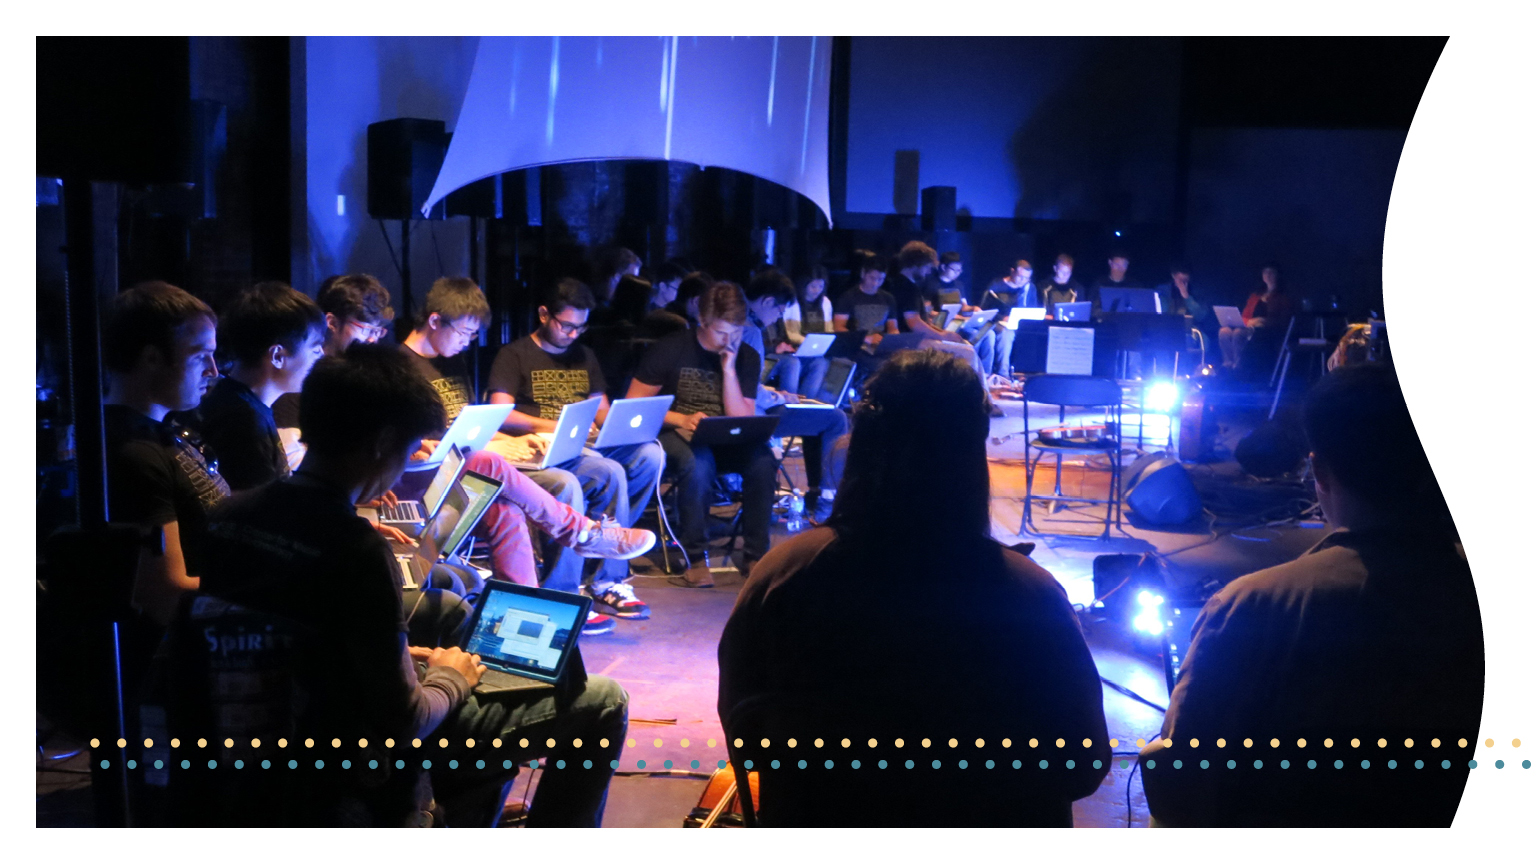 A group of students using laptops to create music.